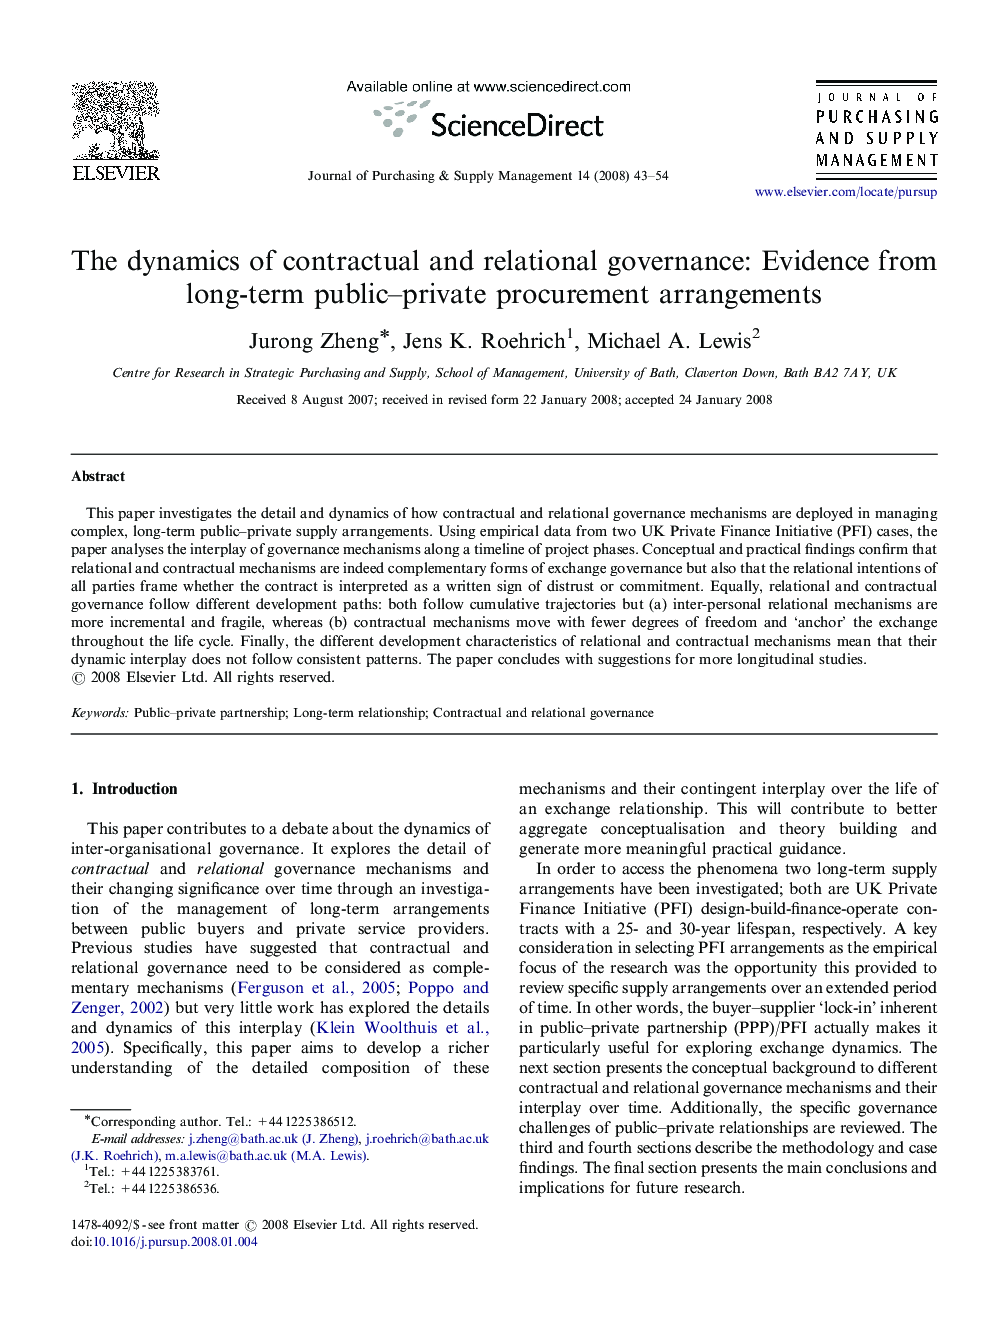 The dynamics of contractual and relational governance: Evidence from long-term public–private procurement arrangements